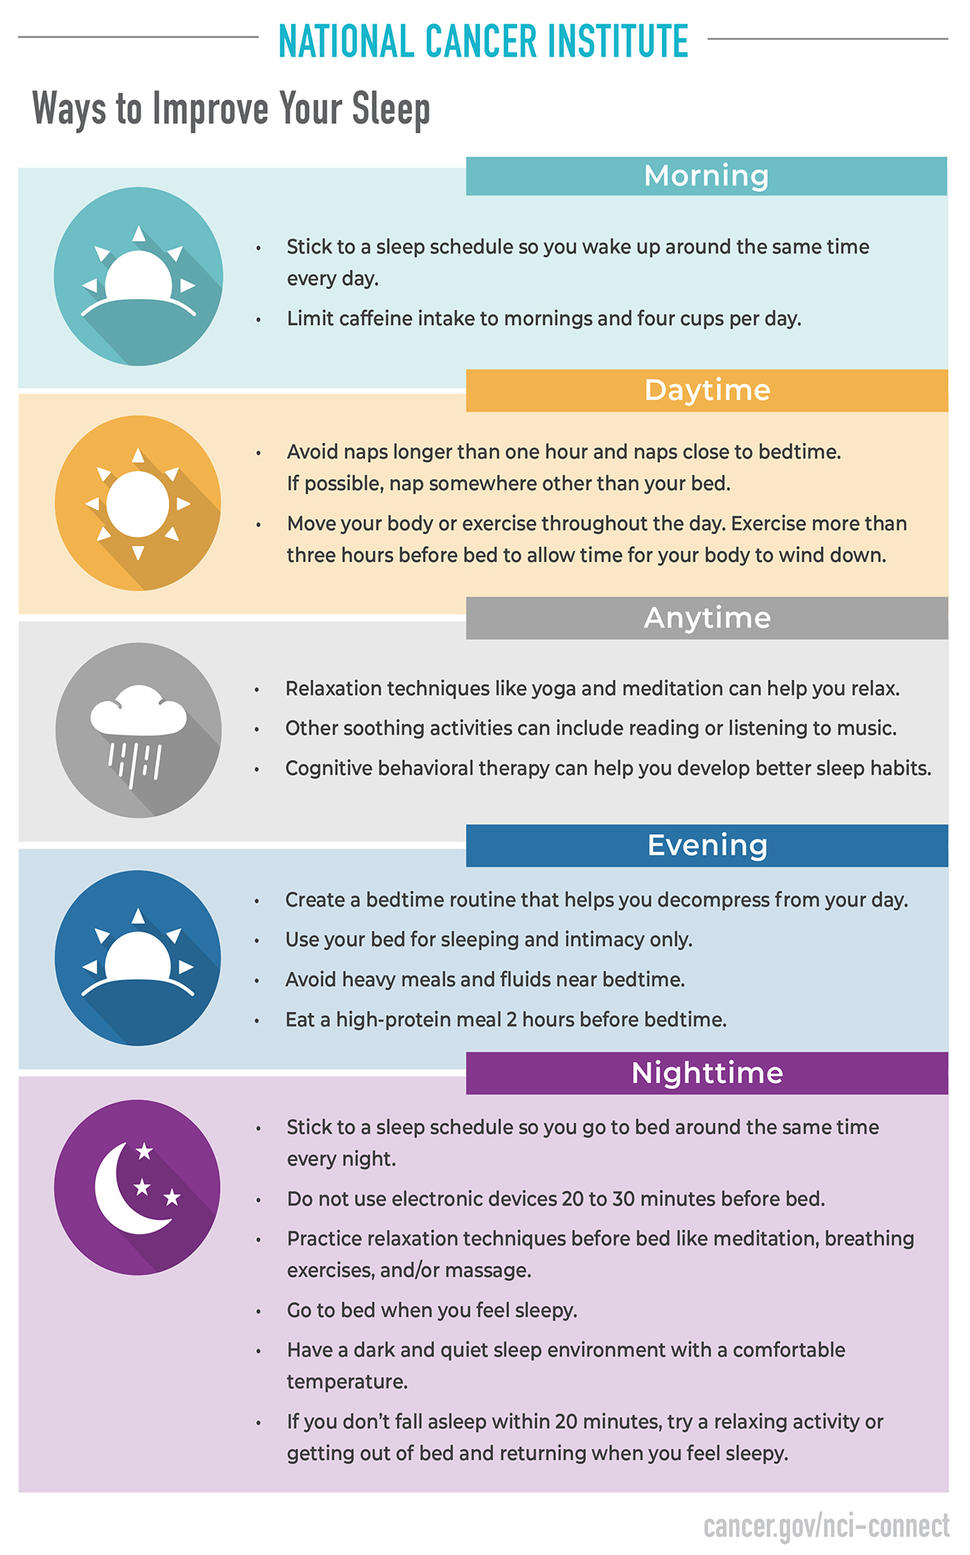 Infographic titled: “Ways to Improve Your Sleep,” which outlines tips to practice during morning, daytime, evening, nighttime, and anytime. 